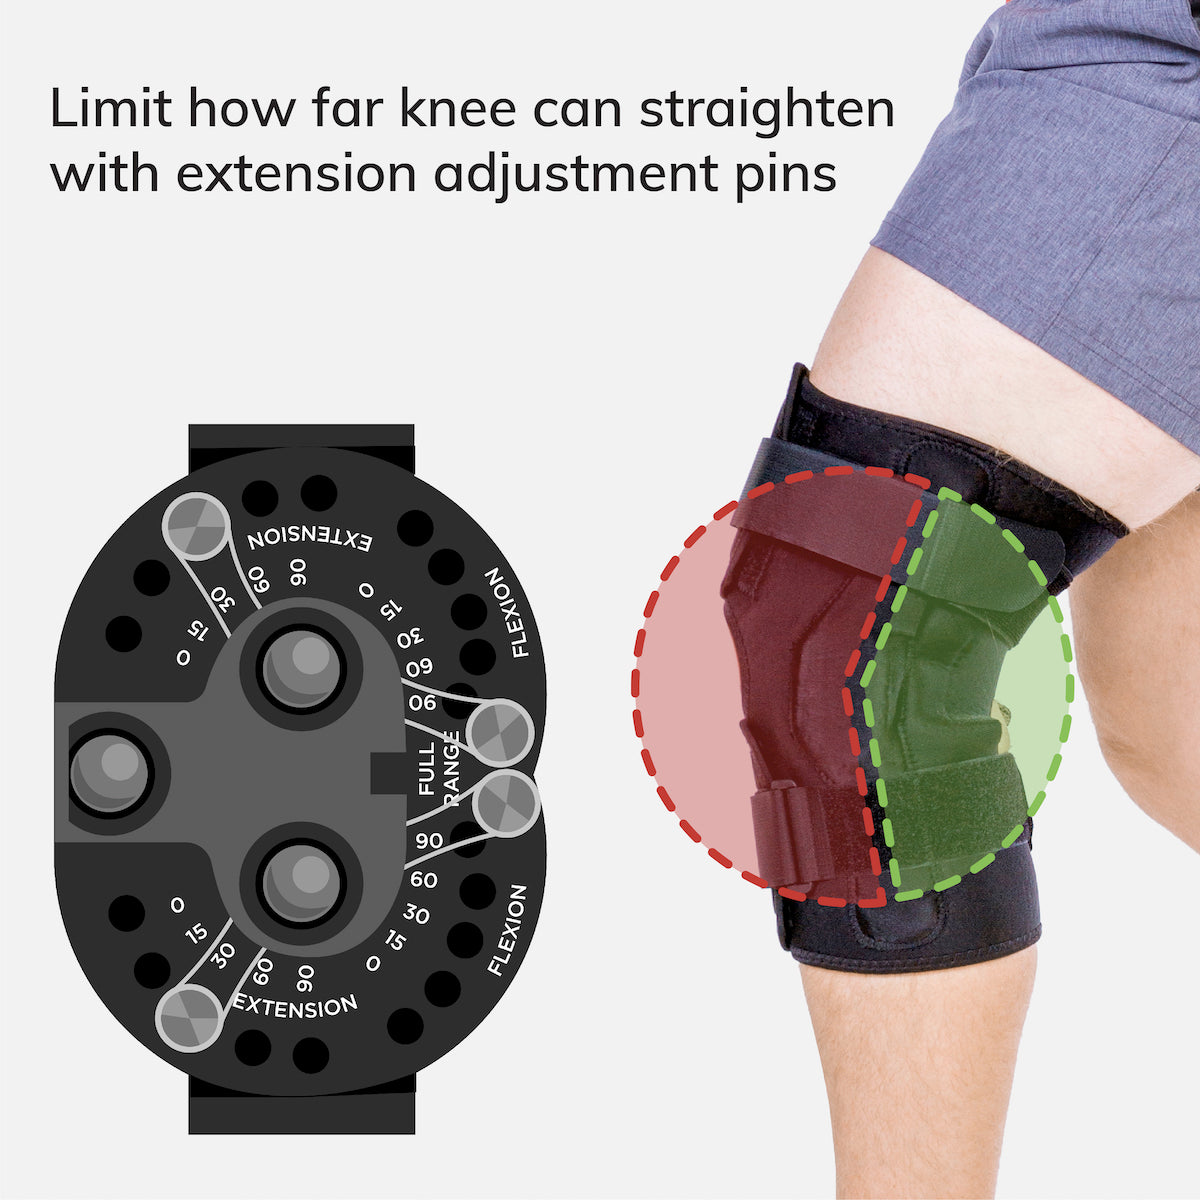 Lower portion of the brace to treat hyperextended knee injuries is a compression sleeve